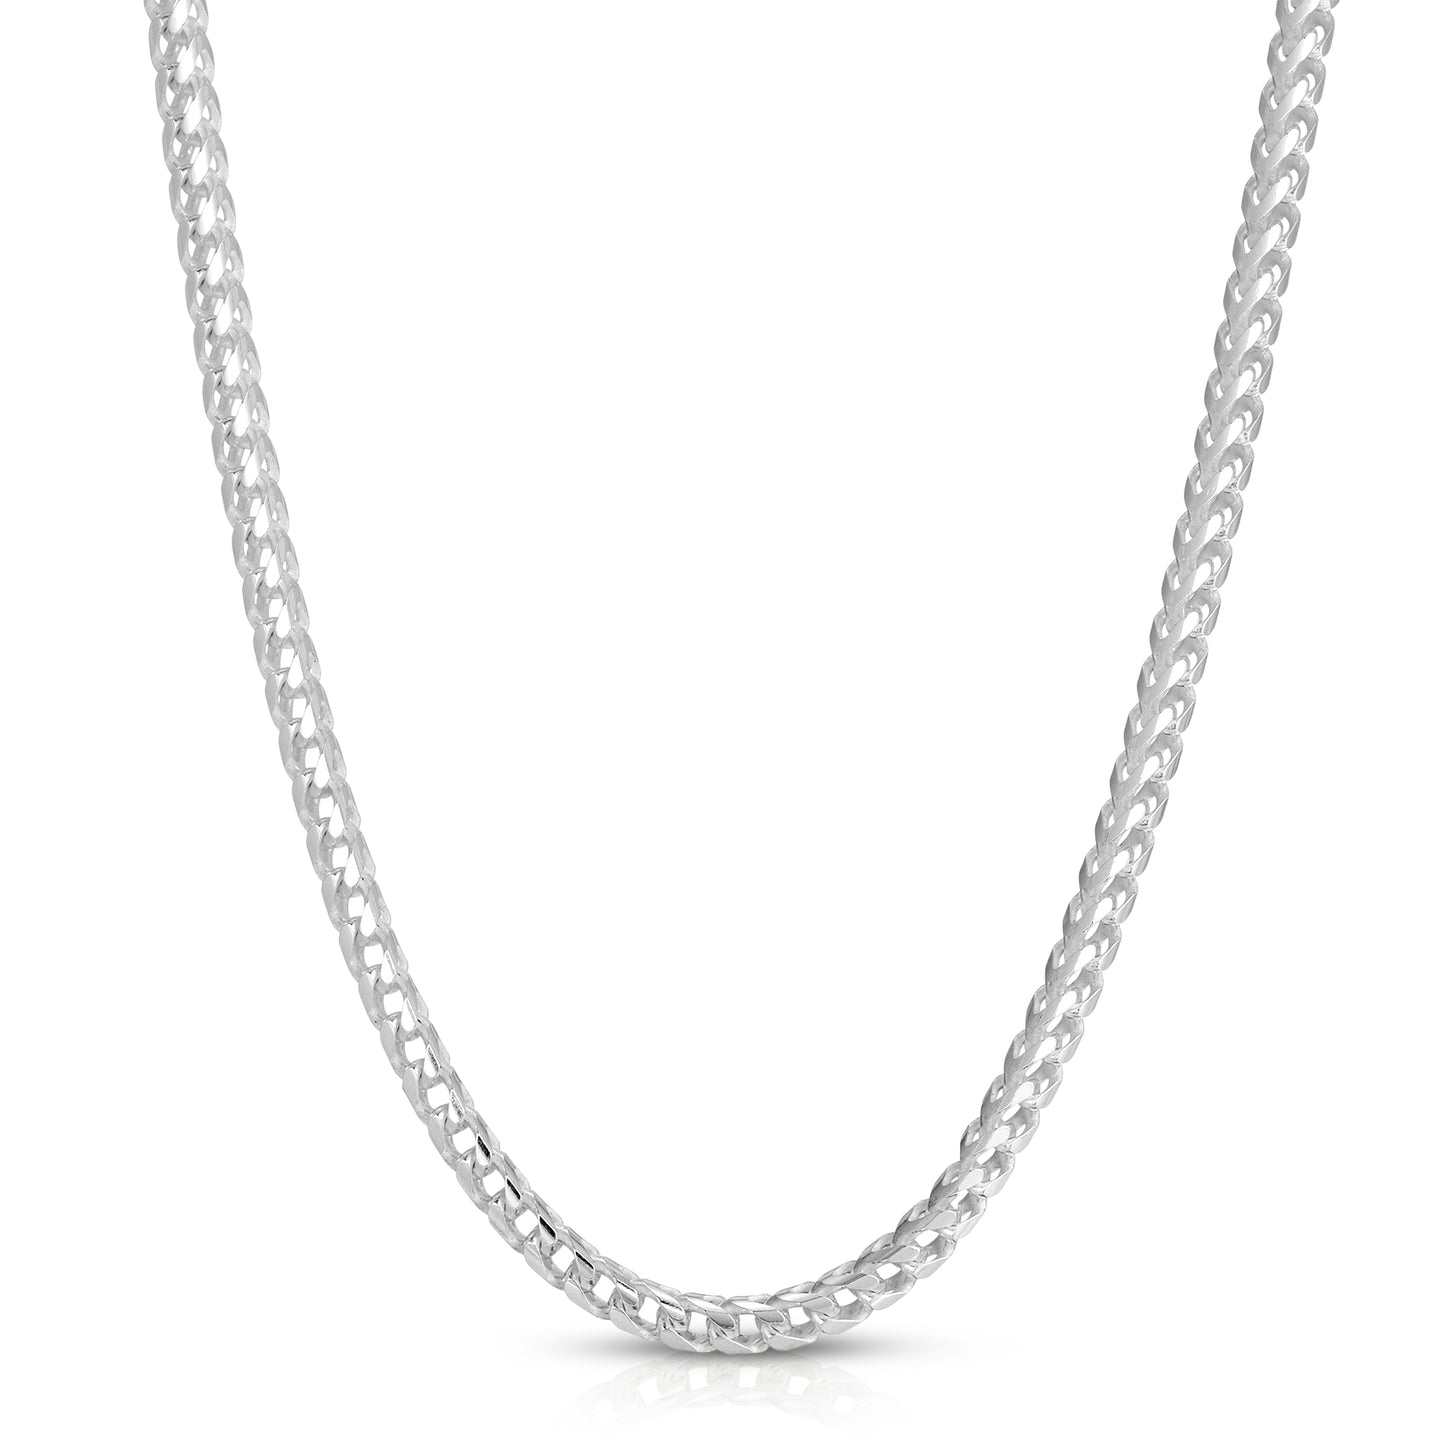 Proclamation Jewelry Men's 4mm Silver Franco Chain